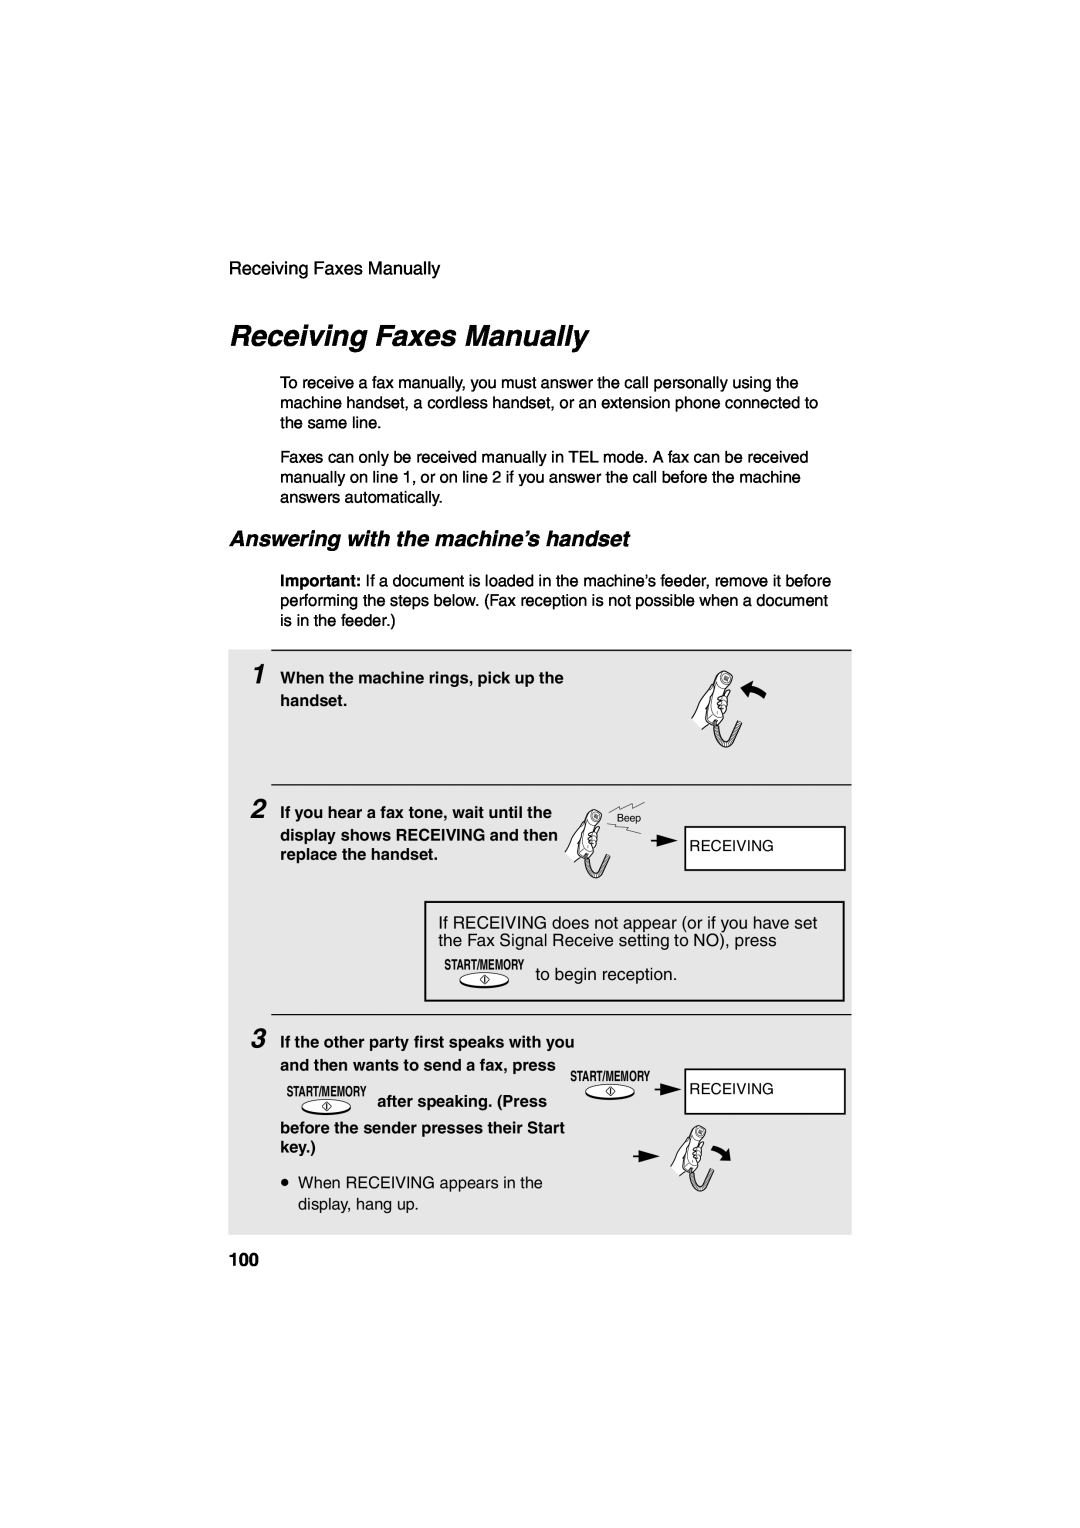 Sharp UX-CD600 operation manual Receiving Faxes Manually, Answering with the machine’s handset 